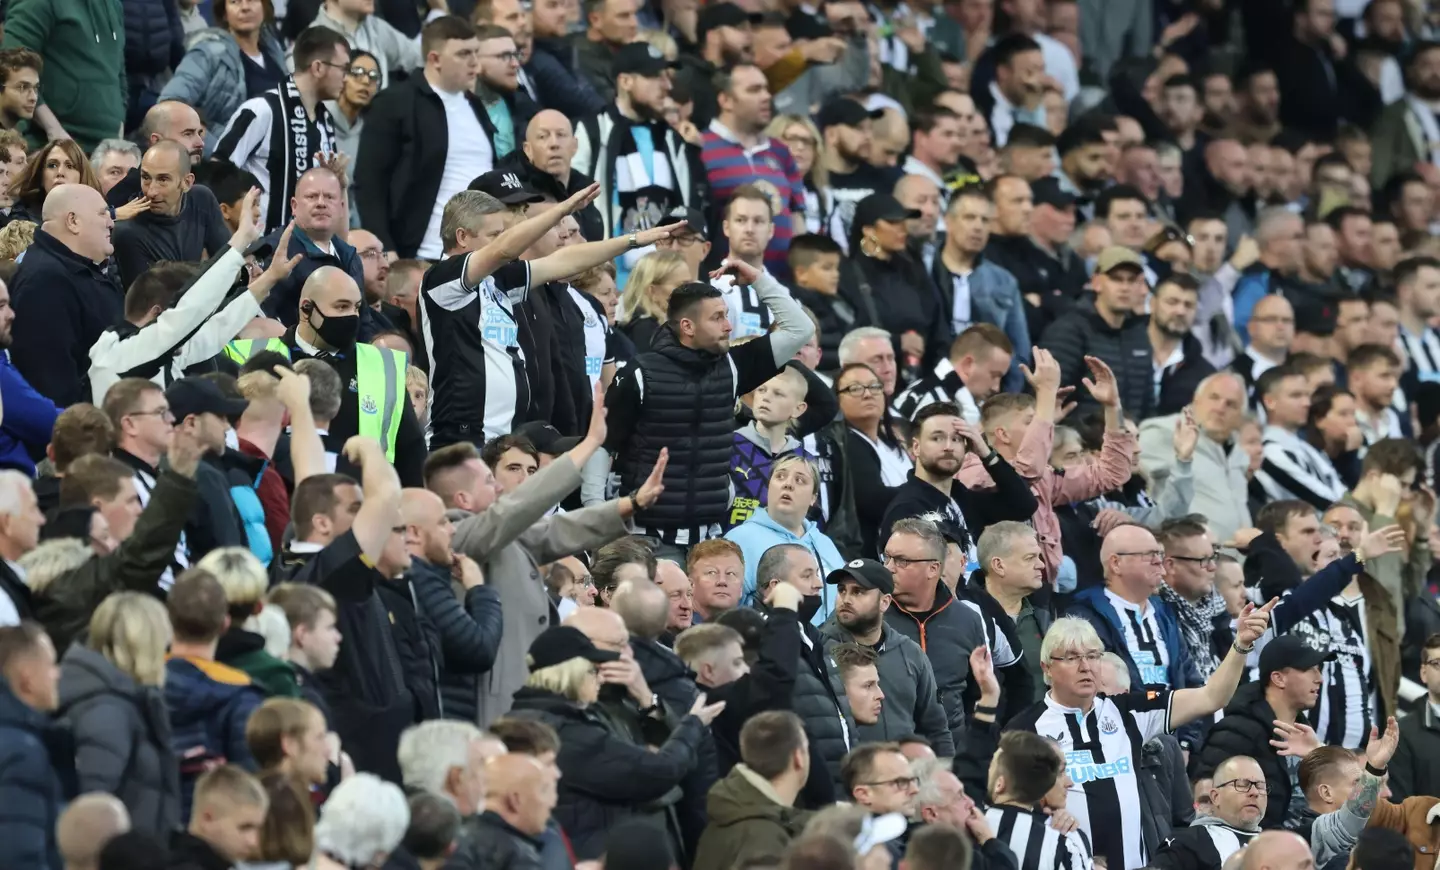 Newcastle fans gesture to the referee after a fan collapses at St James' Park (Image: Alamy)